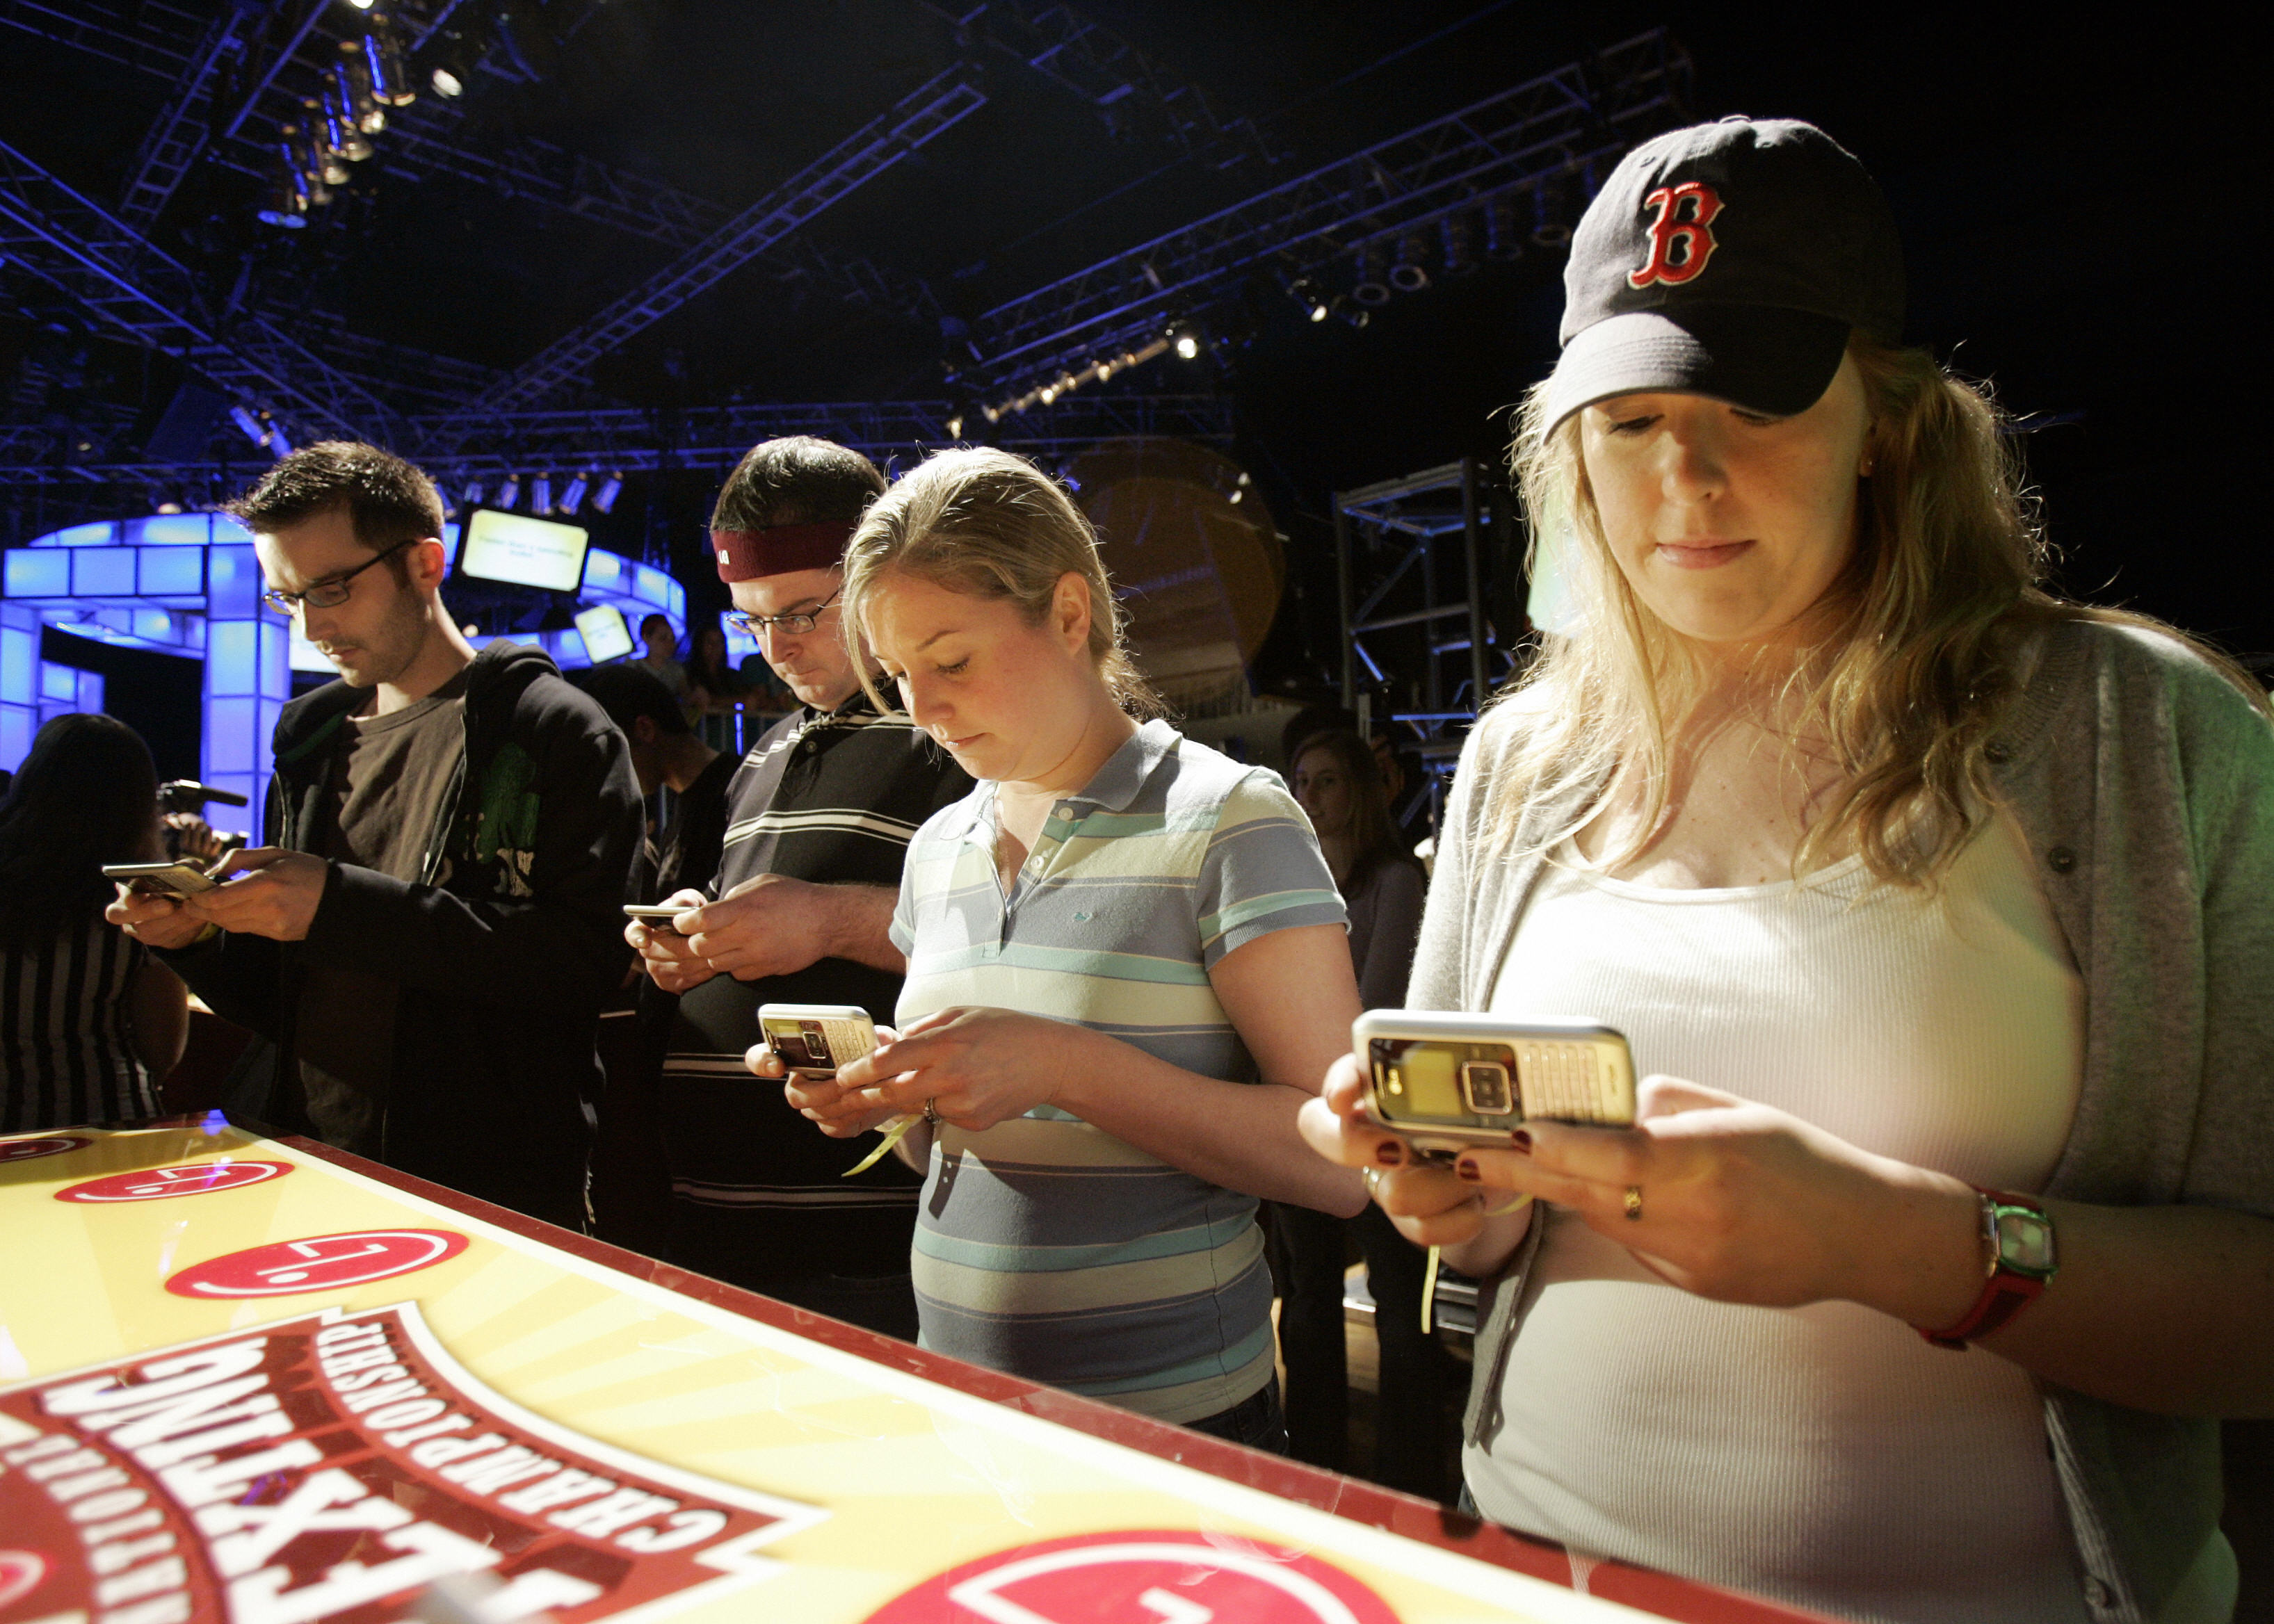 Vanessa LeBlanc (R), Susan Mygatt (2nd R) and others compete in an early round of the LG National Texting Championship, 21 April 2007, at the Roseland Ballroom in New York, sponsored by LG Mobile Phones. (STAN HONDA&mdash;AFP/Getty Images)